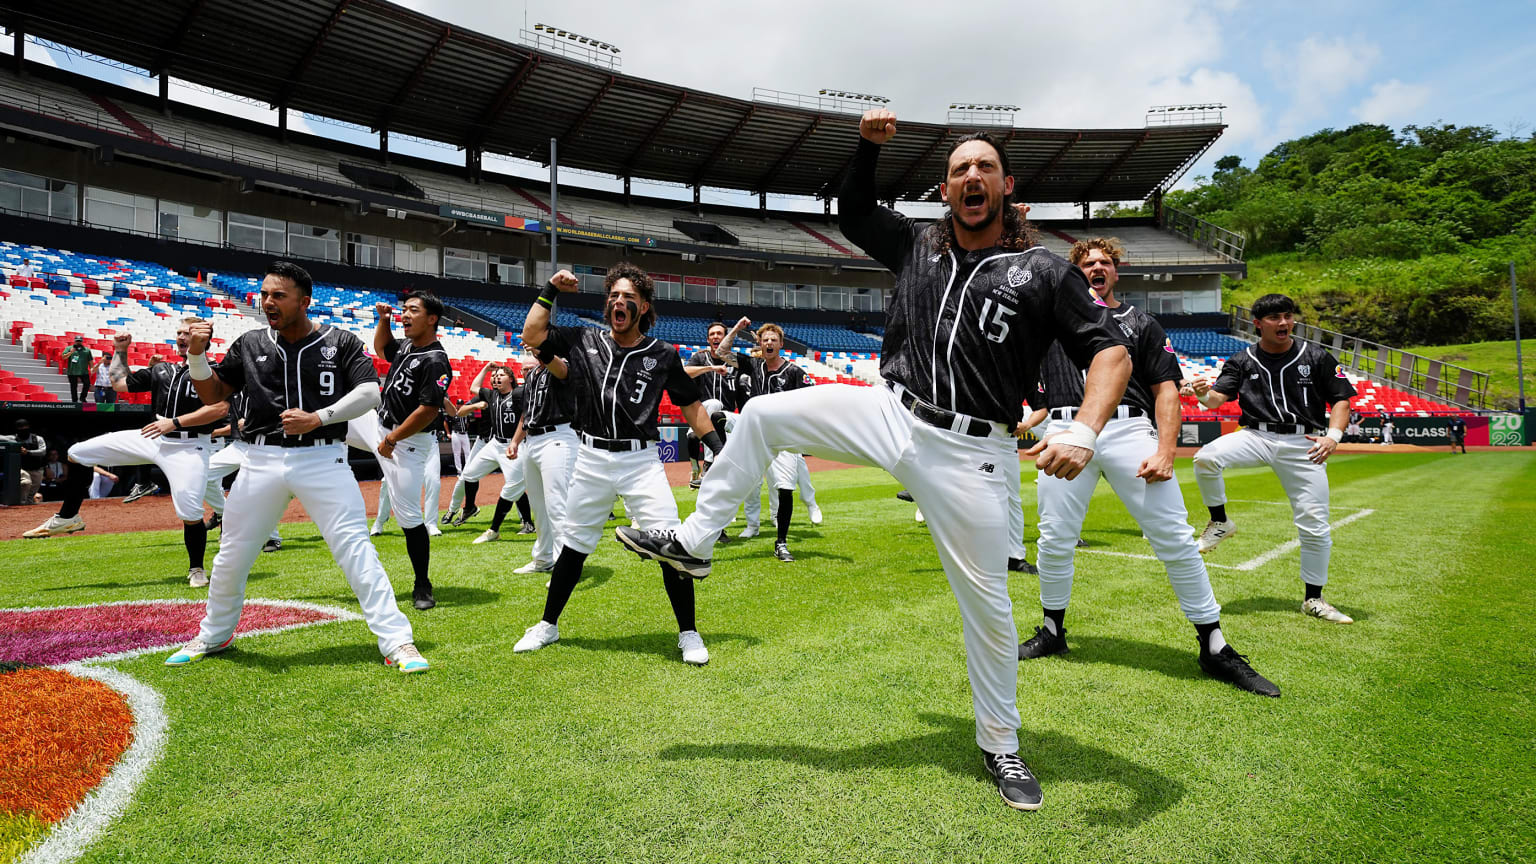 Baseball players in black jerseys and white pants perform a dance ritual on the field before a game